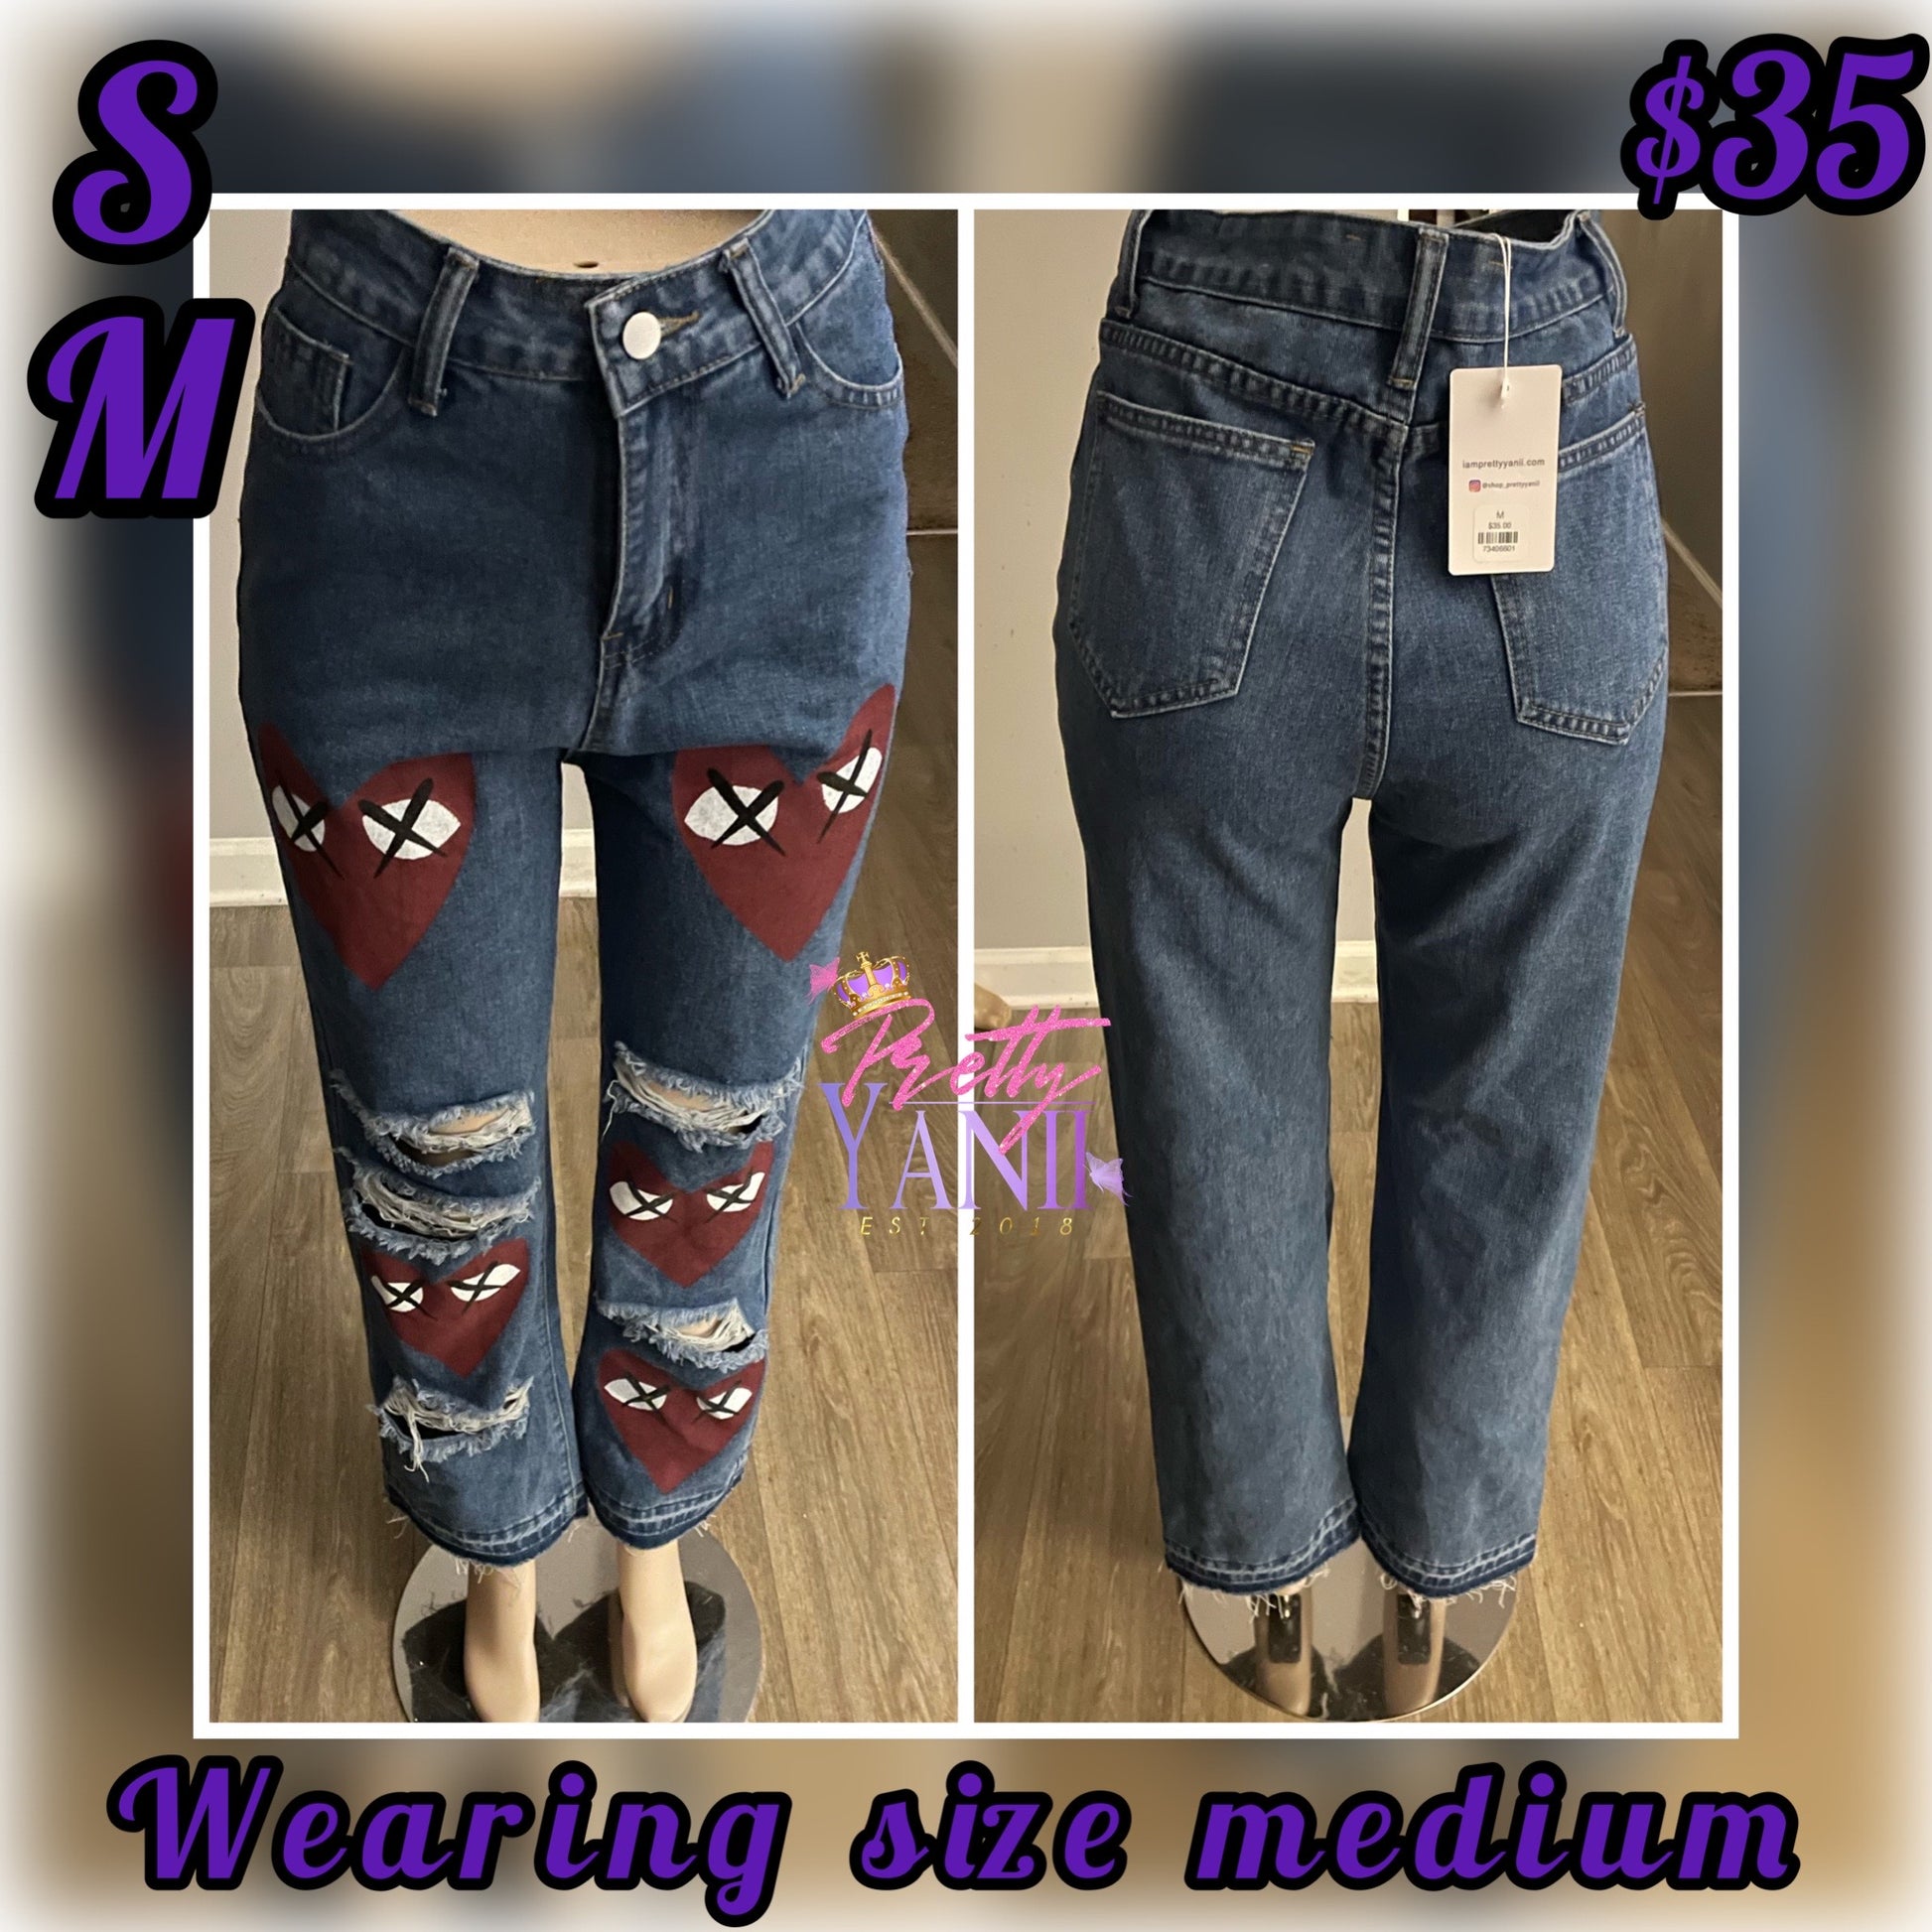 Petite-fit denim jeans with a charming red heart design